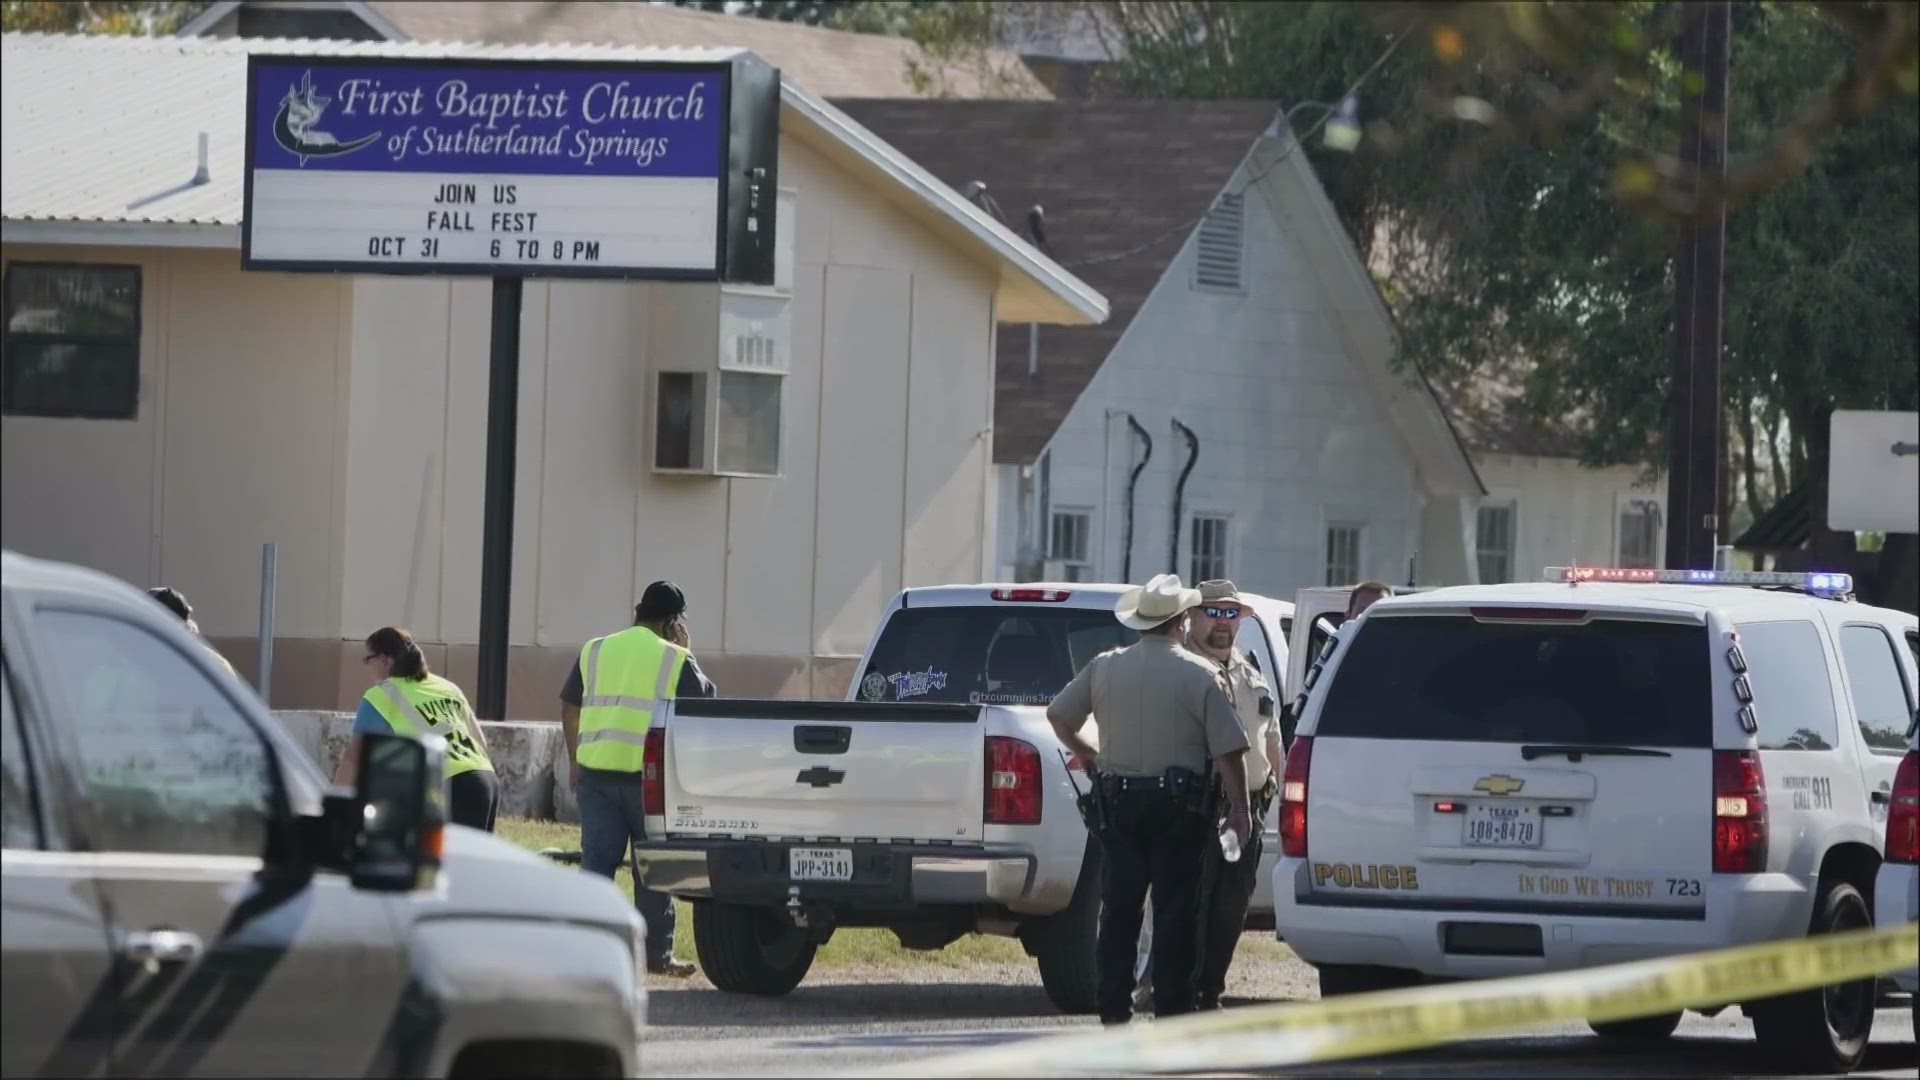 Twenty-six worshippers were killed and 22 others injured in the tragic November 2017 mass shooting at the First Baptist Church of Sutherland Springs.